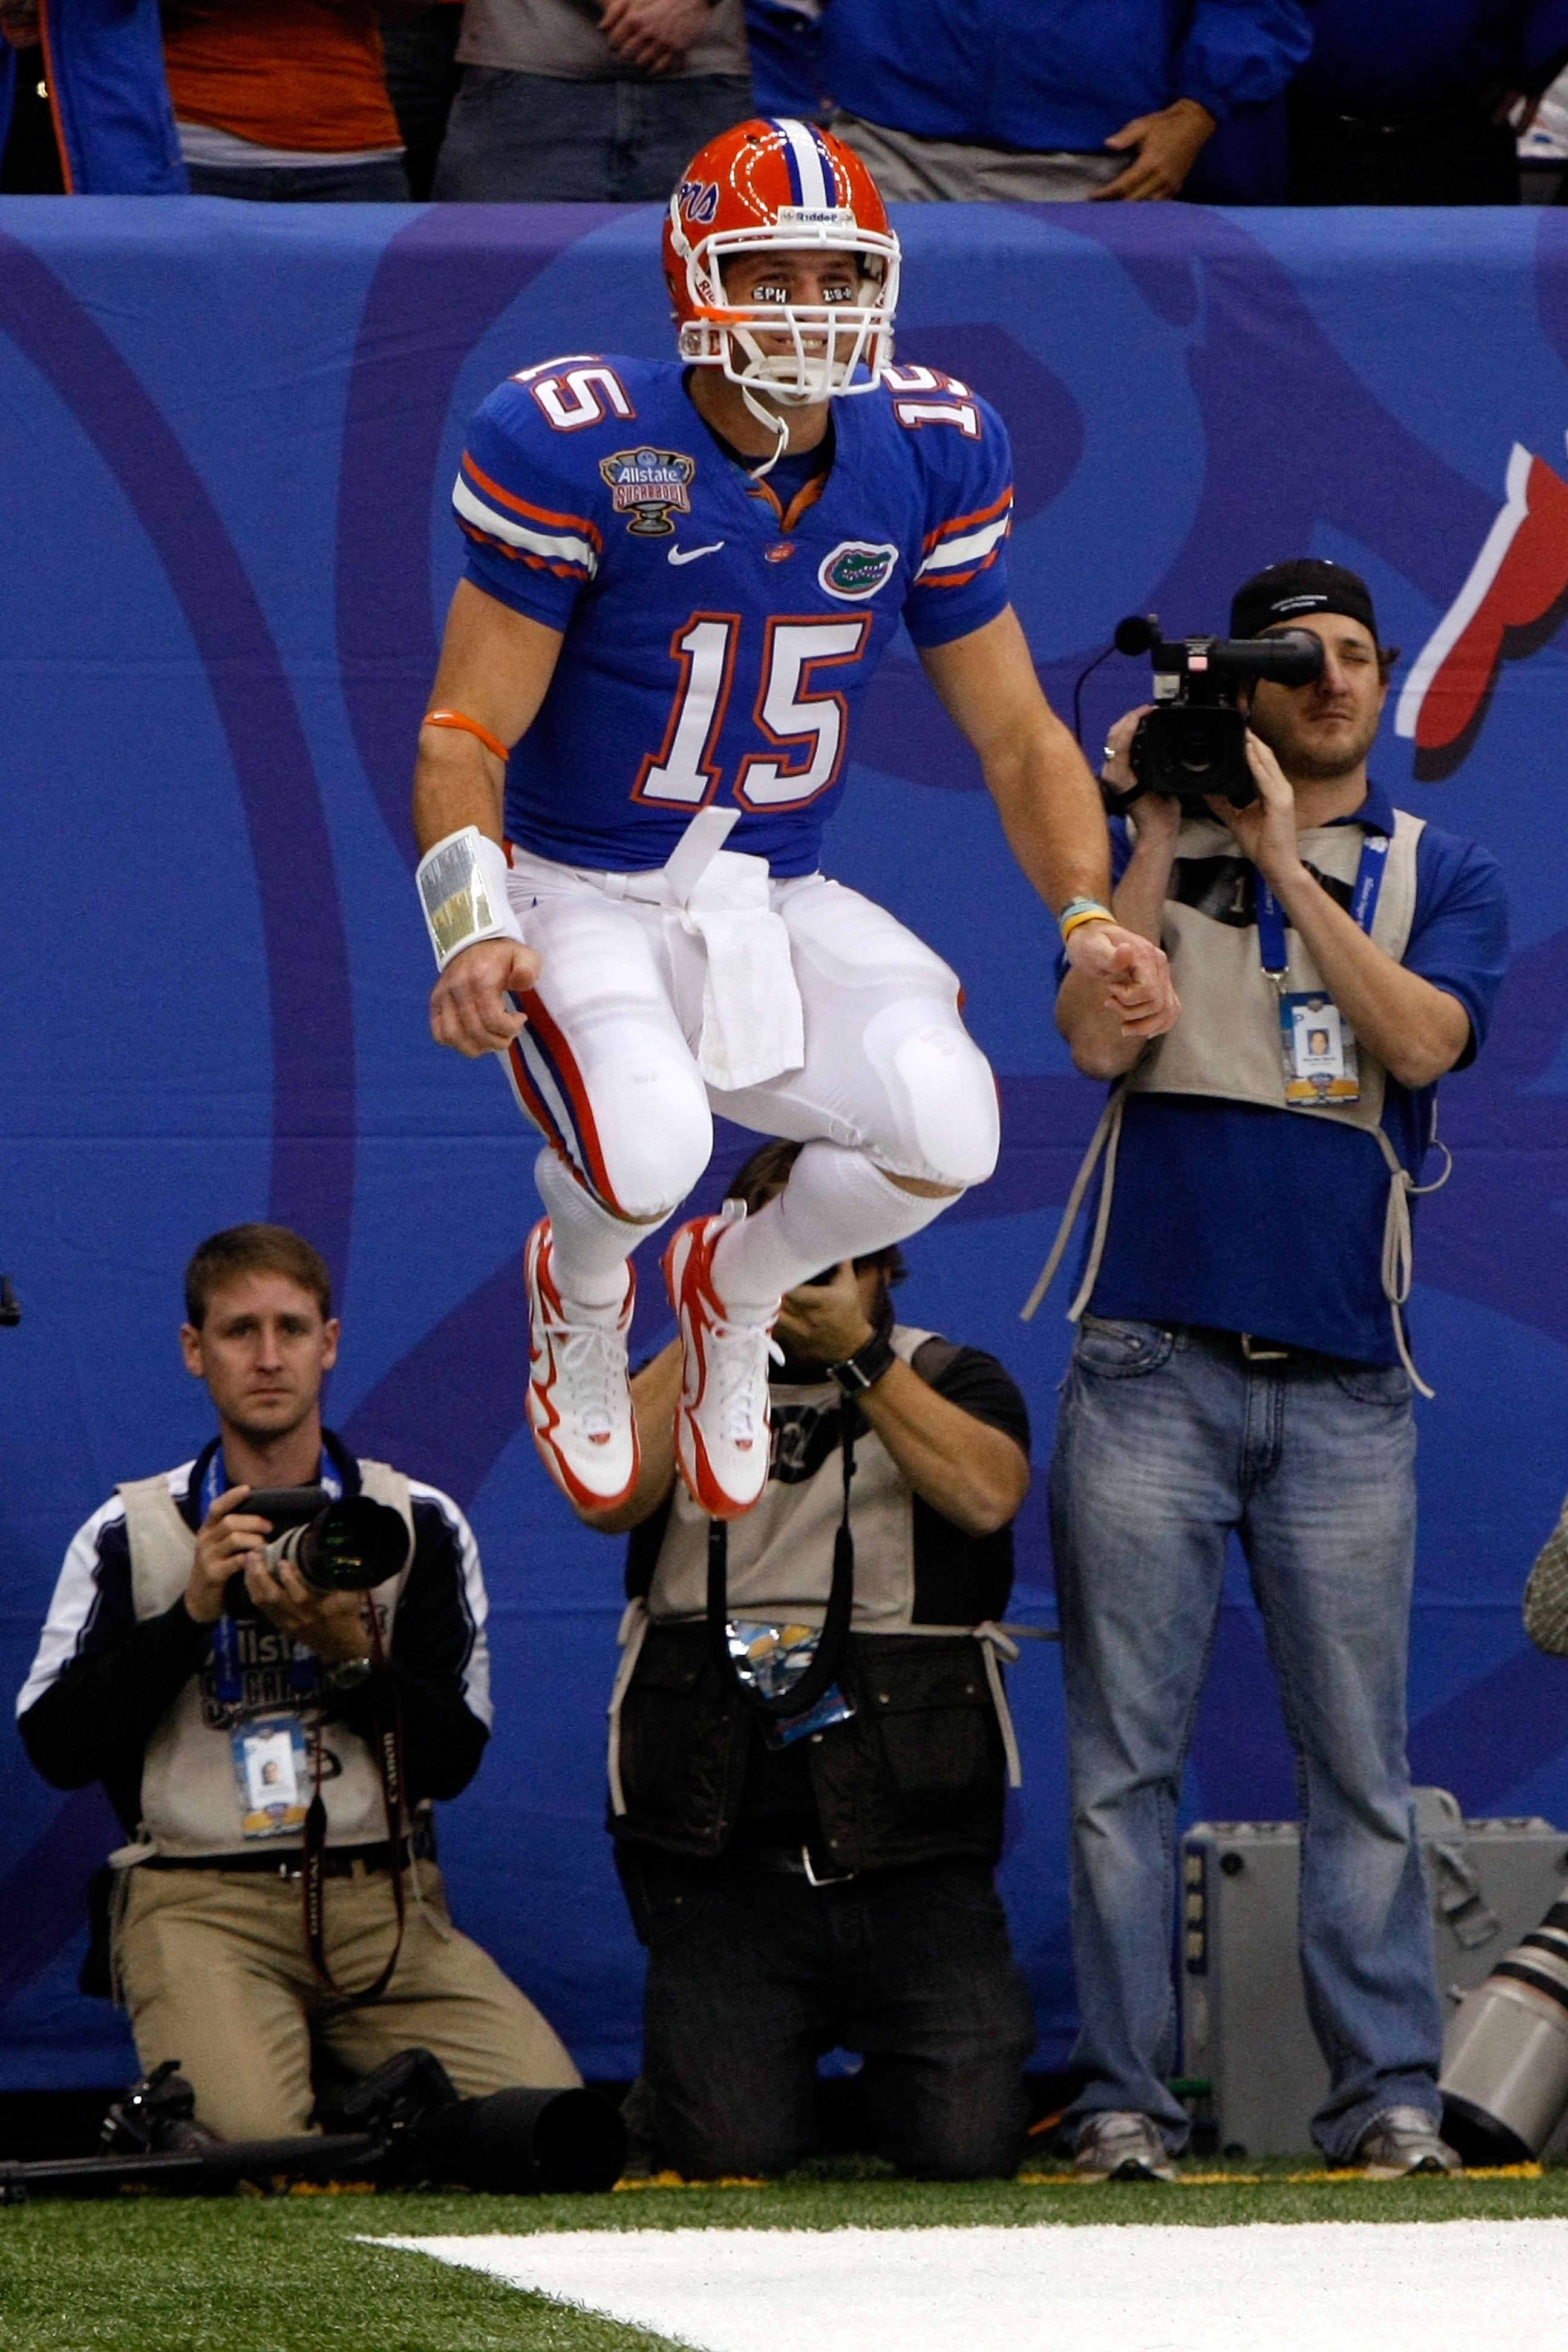 NEW ORLEANS - JANUARY 01:  Quarterback Tim Tebow #15 of the Florida Gators warms up on the sidelines before the Allstate Sugar Bowl at the Louisana Superdome on January 1, 2010 in New Orleans, Louisiana.  (Photo by Kevin C. Cox/Getty Images)